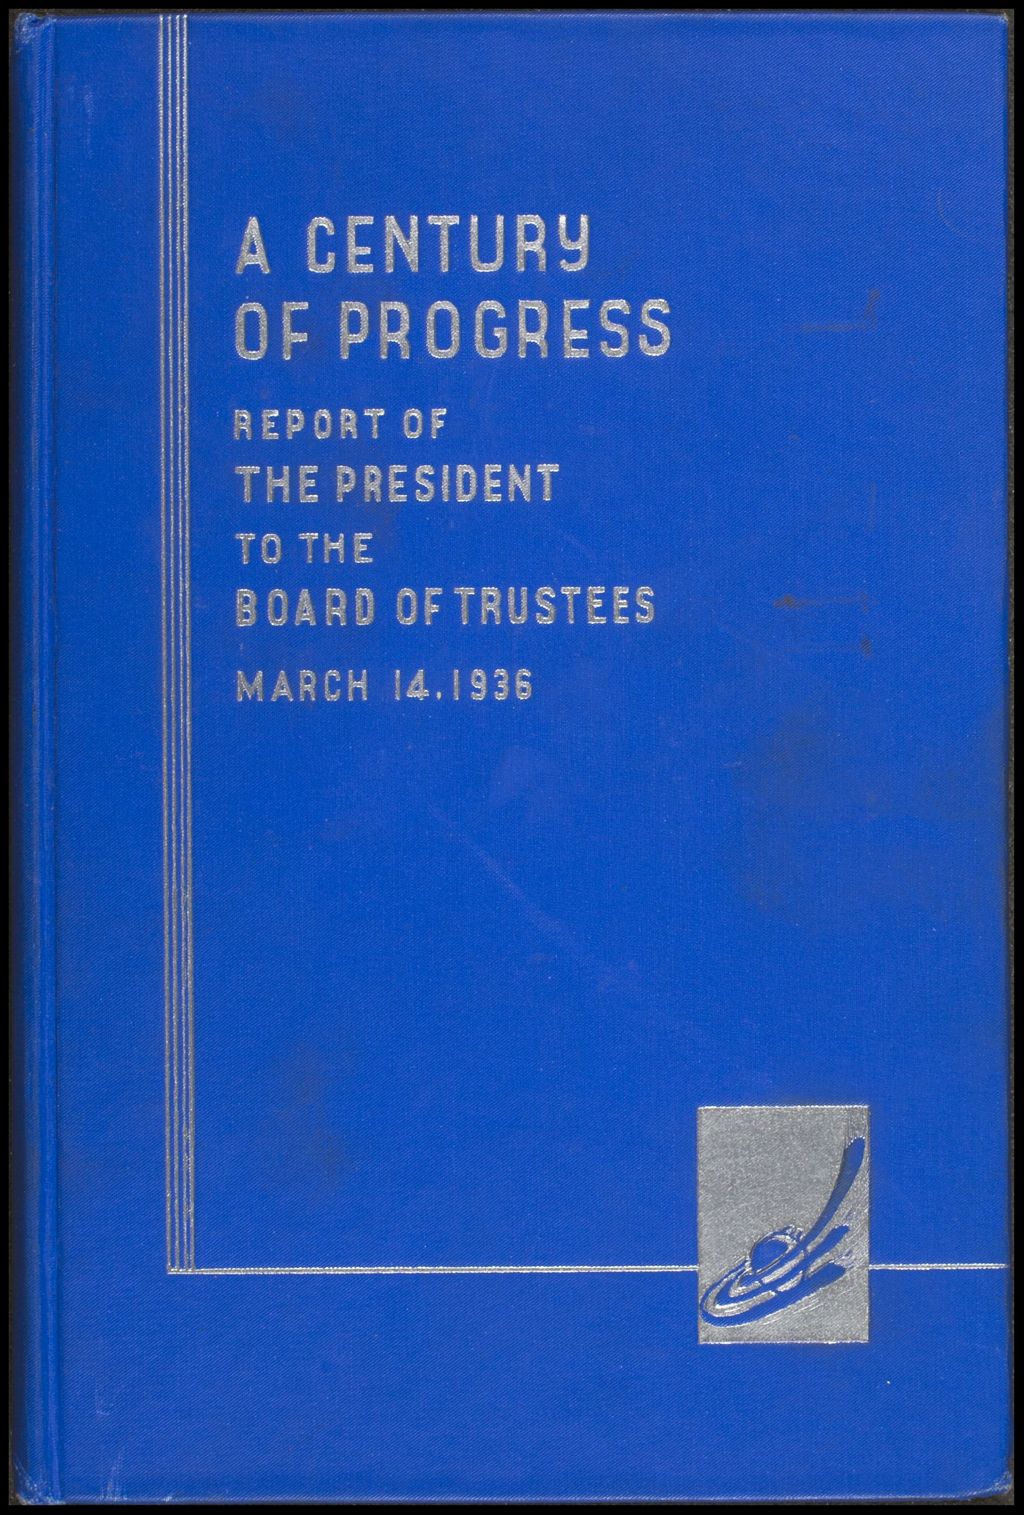 Report of the president of A Century of Progress to the Board of Trustees